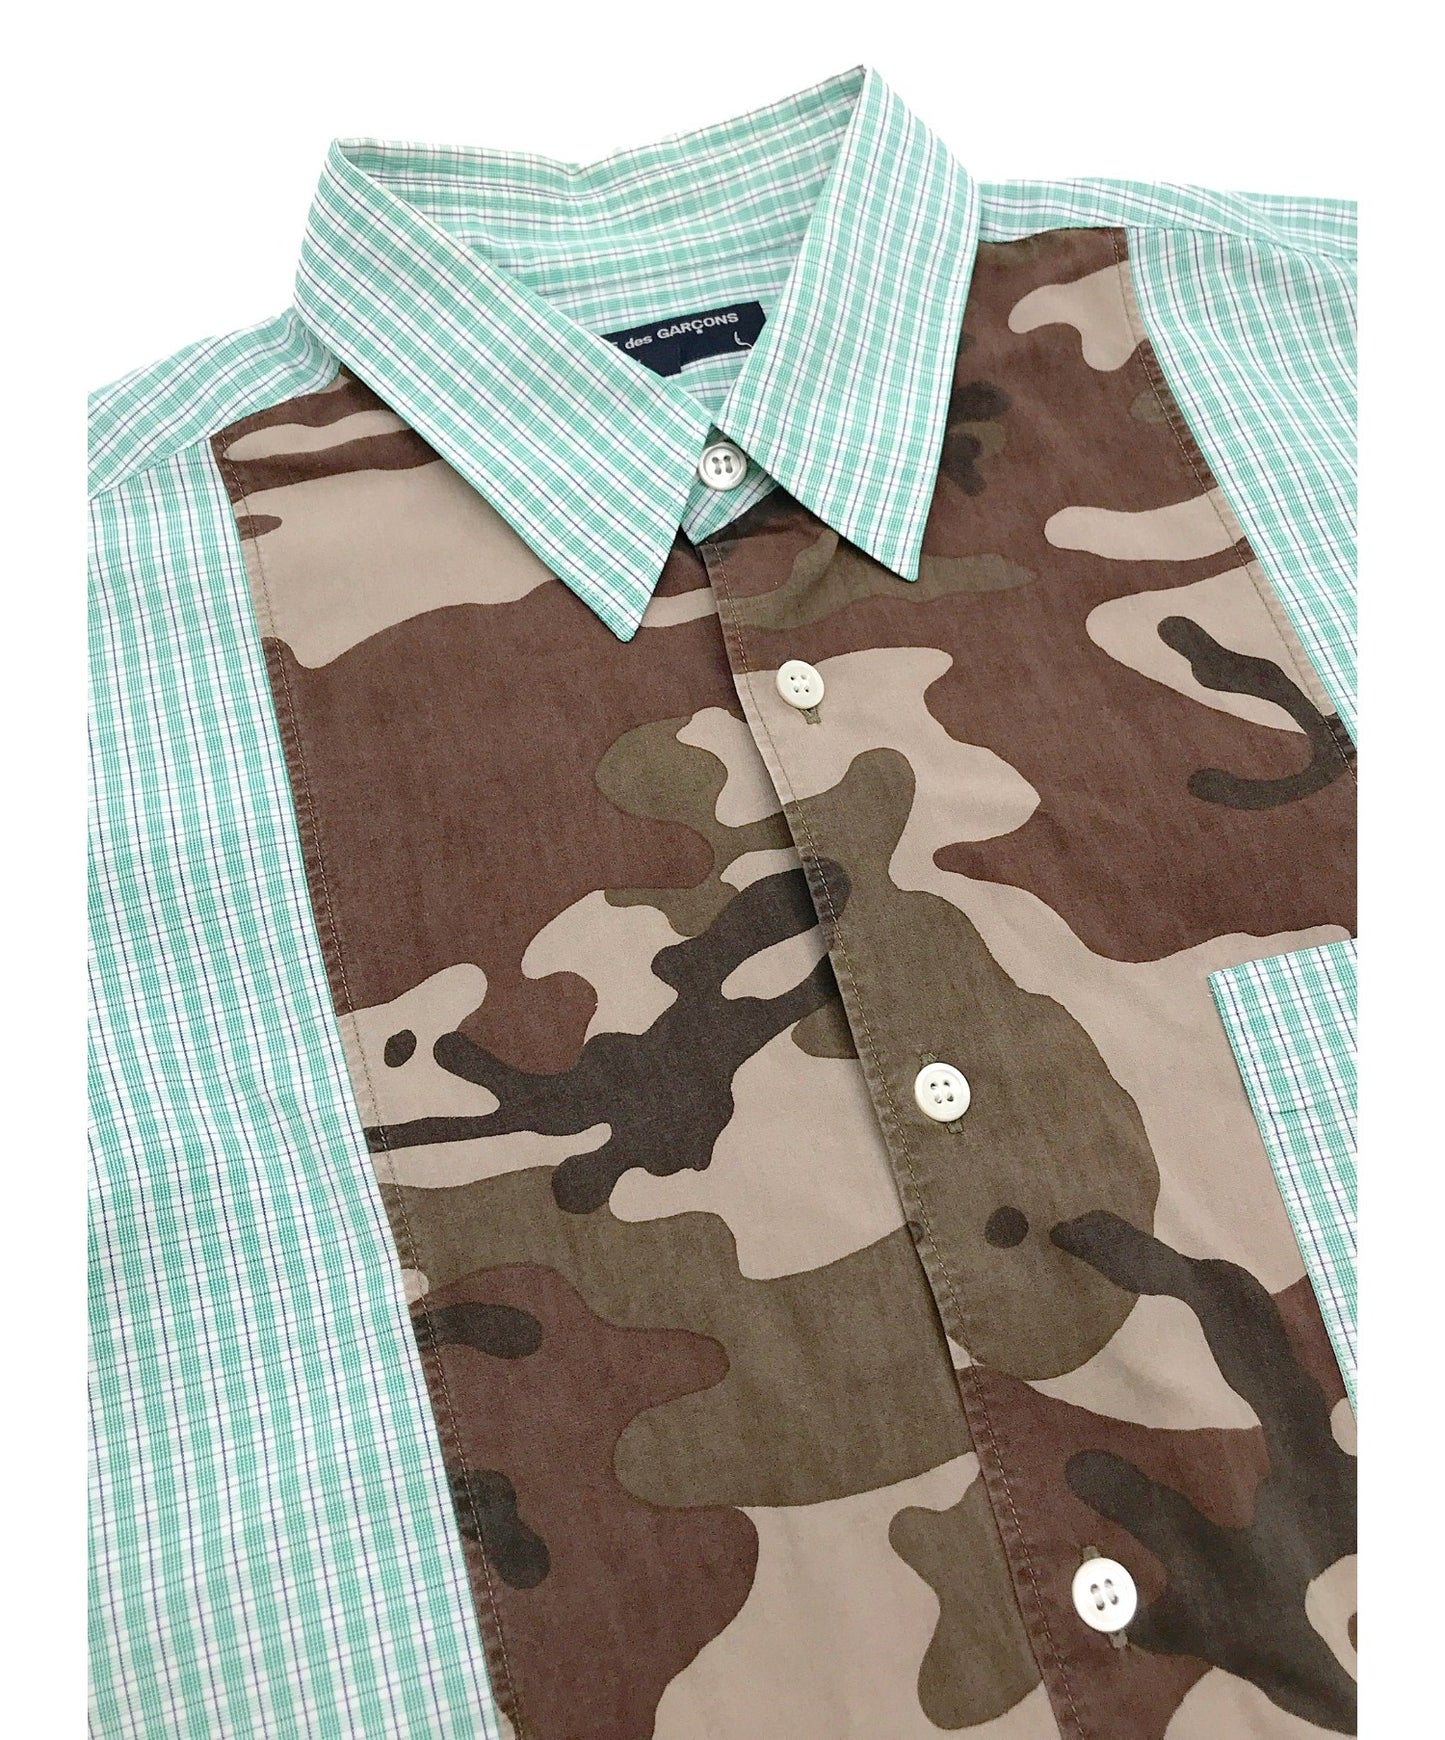 Comme des Garcons Homme Camouflage & Checked Switching Shirt Hi-B003